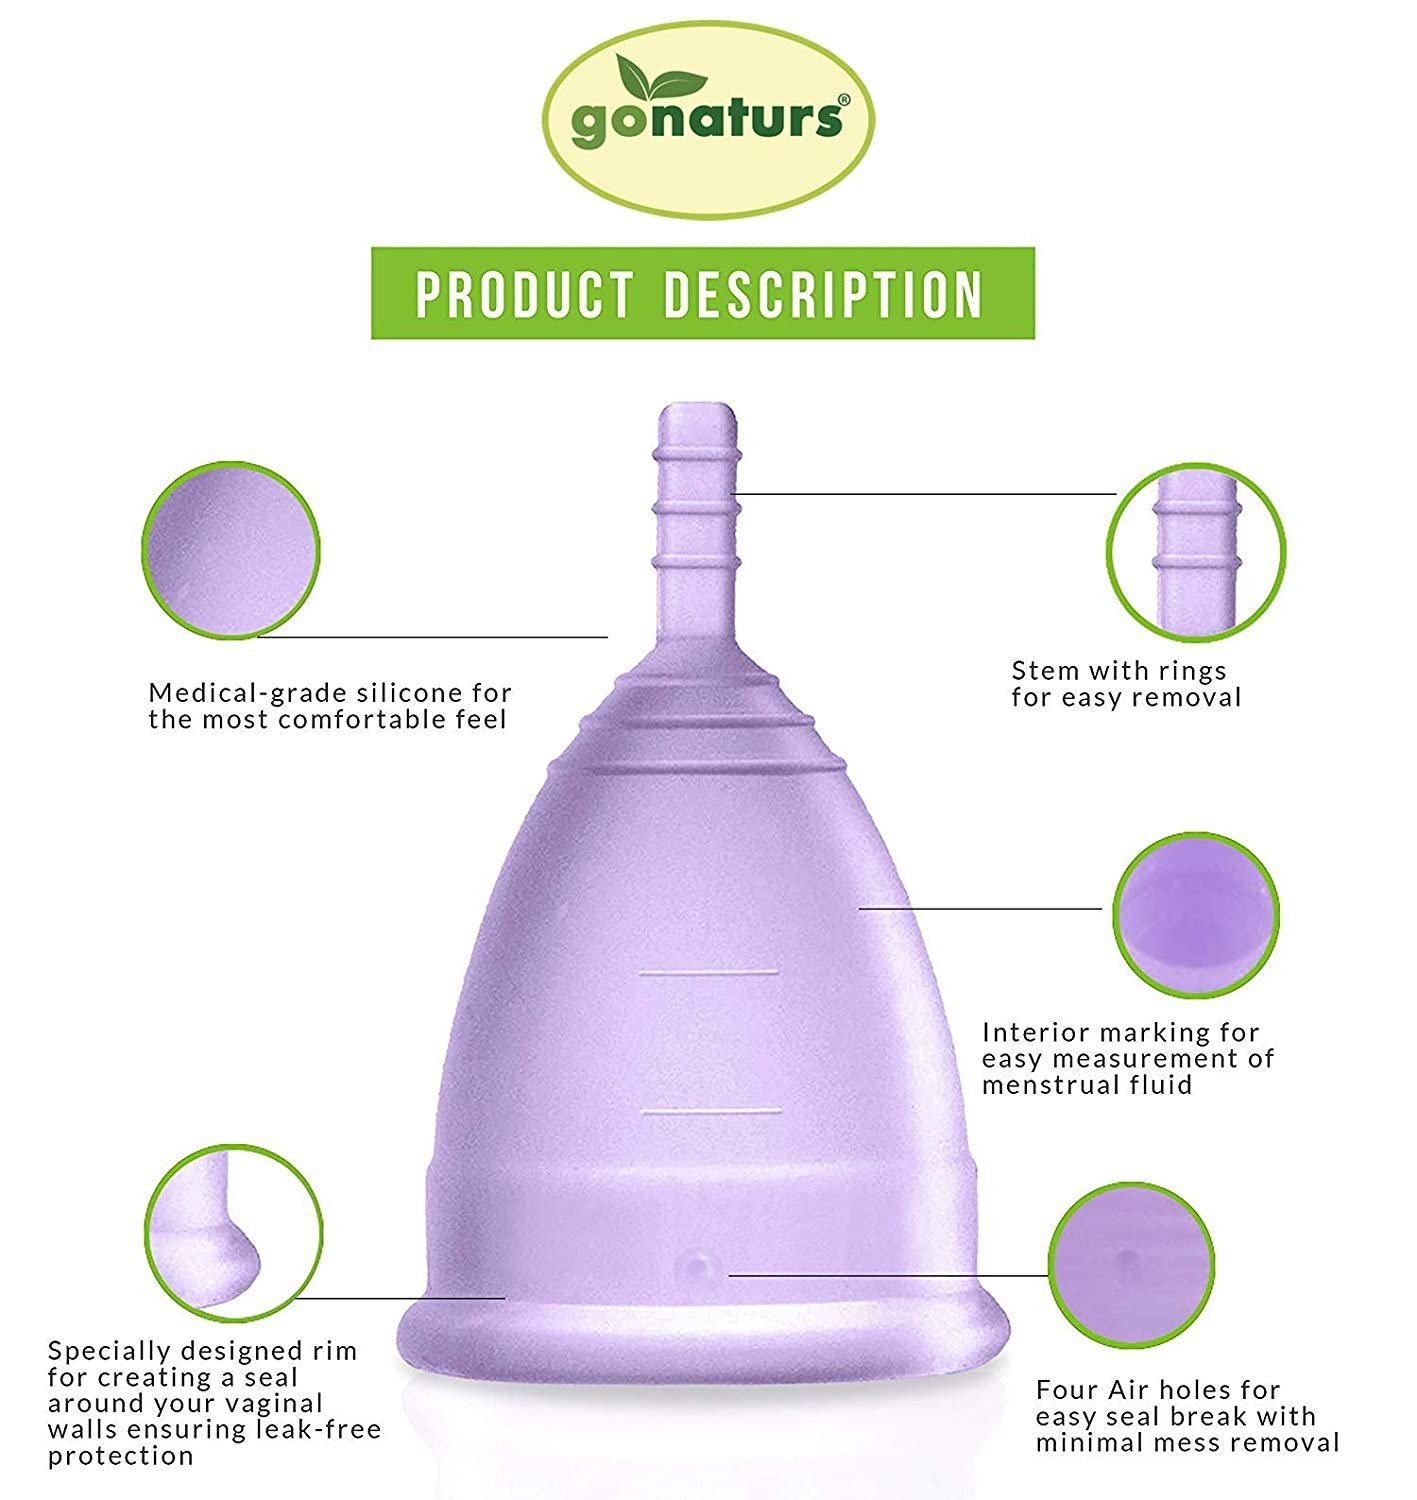 Gonaturs Allergy free Reusable Menstrual Cup for Women Sanitary Pad Free Periods with No Rashes, No Odour,12 hours Leak-Proof Protection - Large